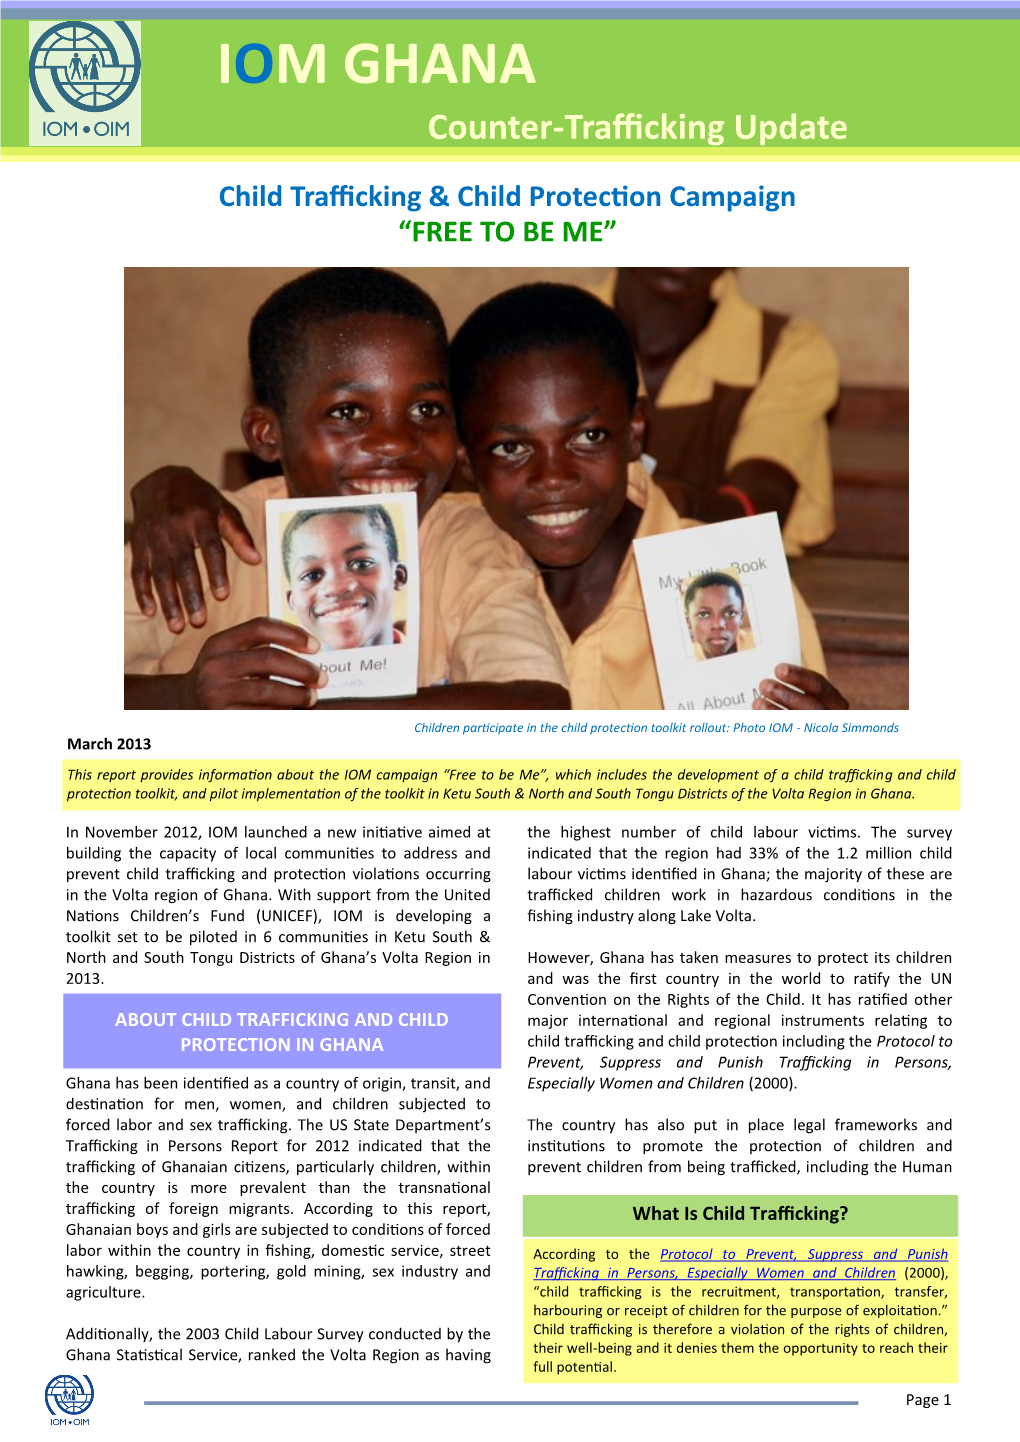 IOM Ghana Child Trafficking & Child Protection Campaign